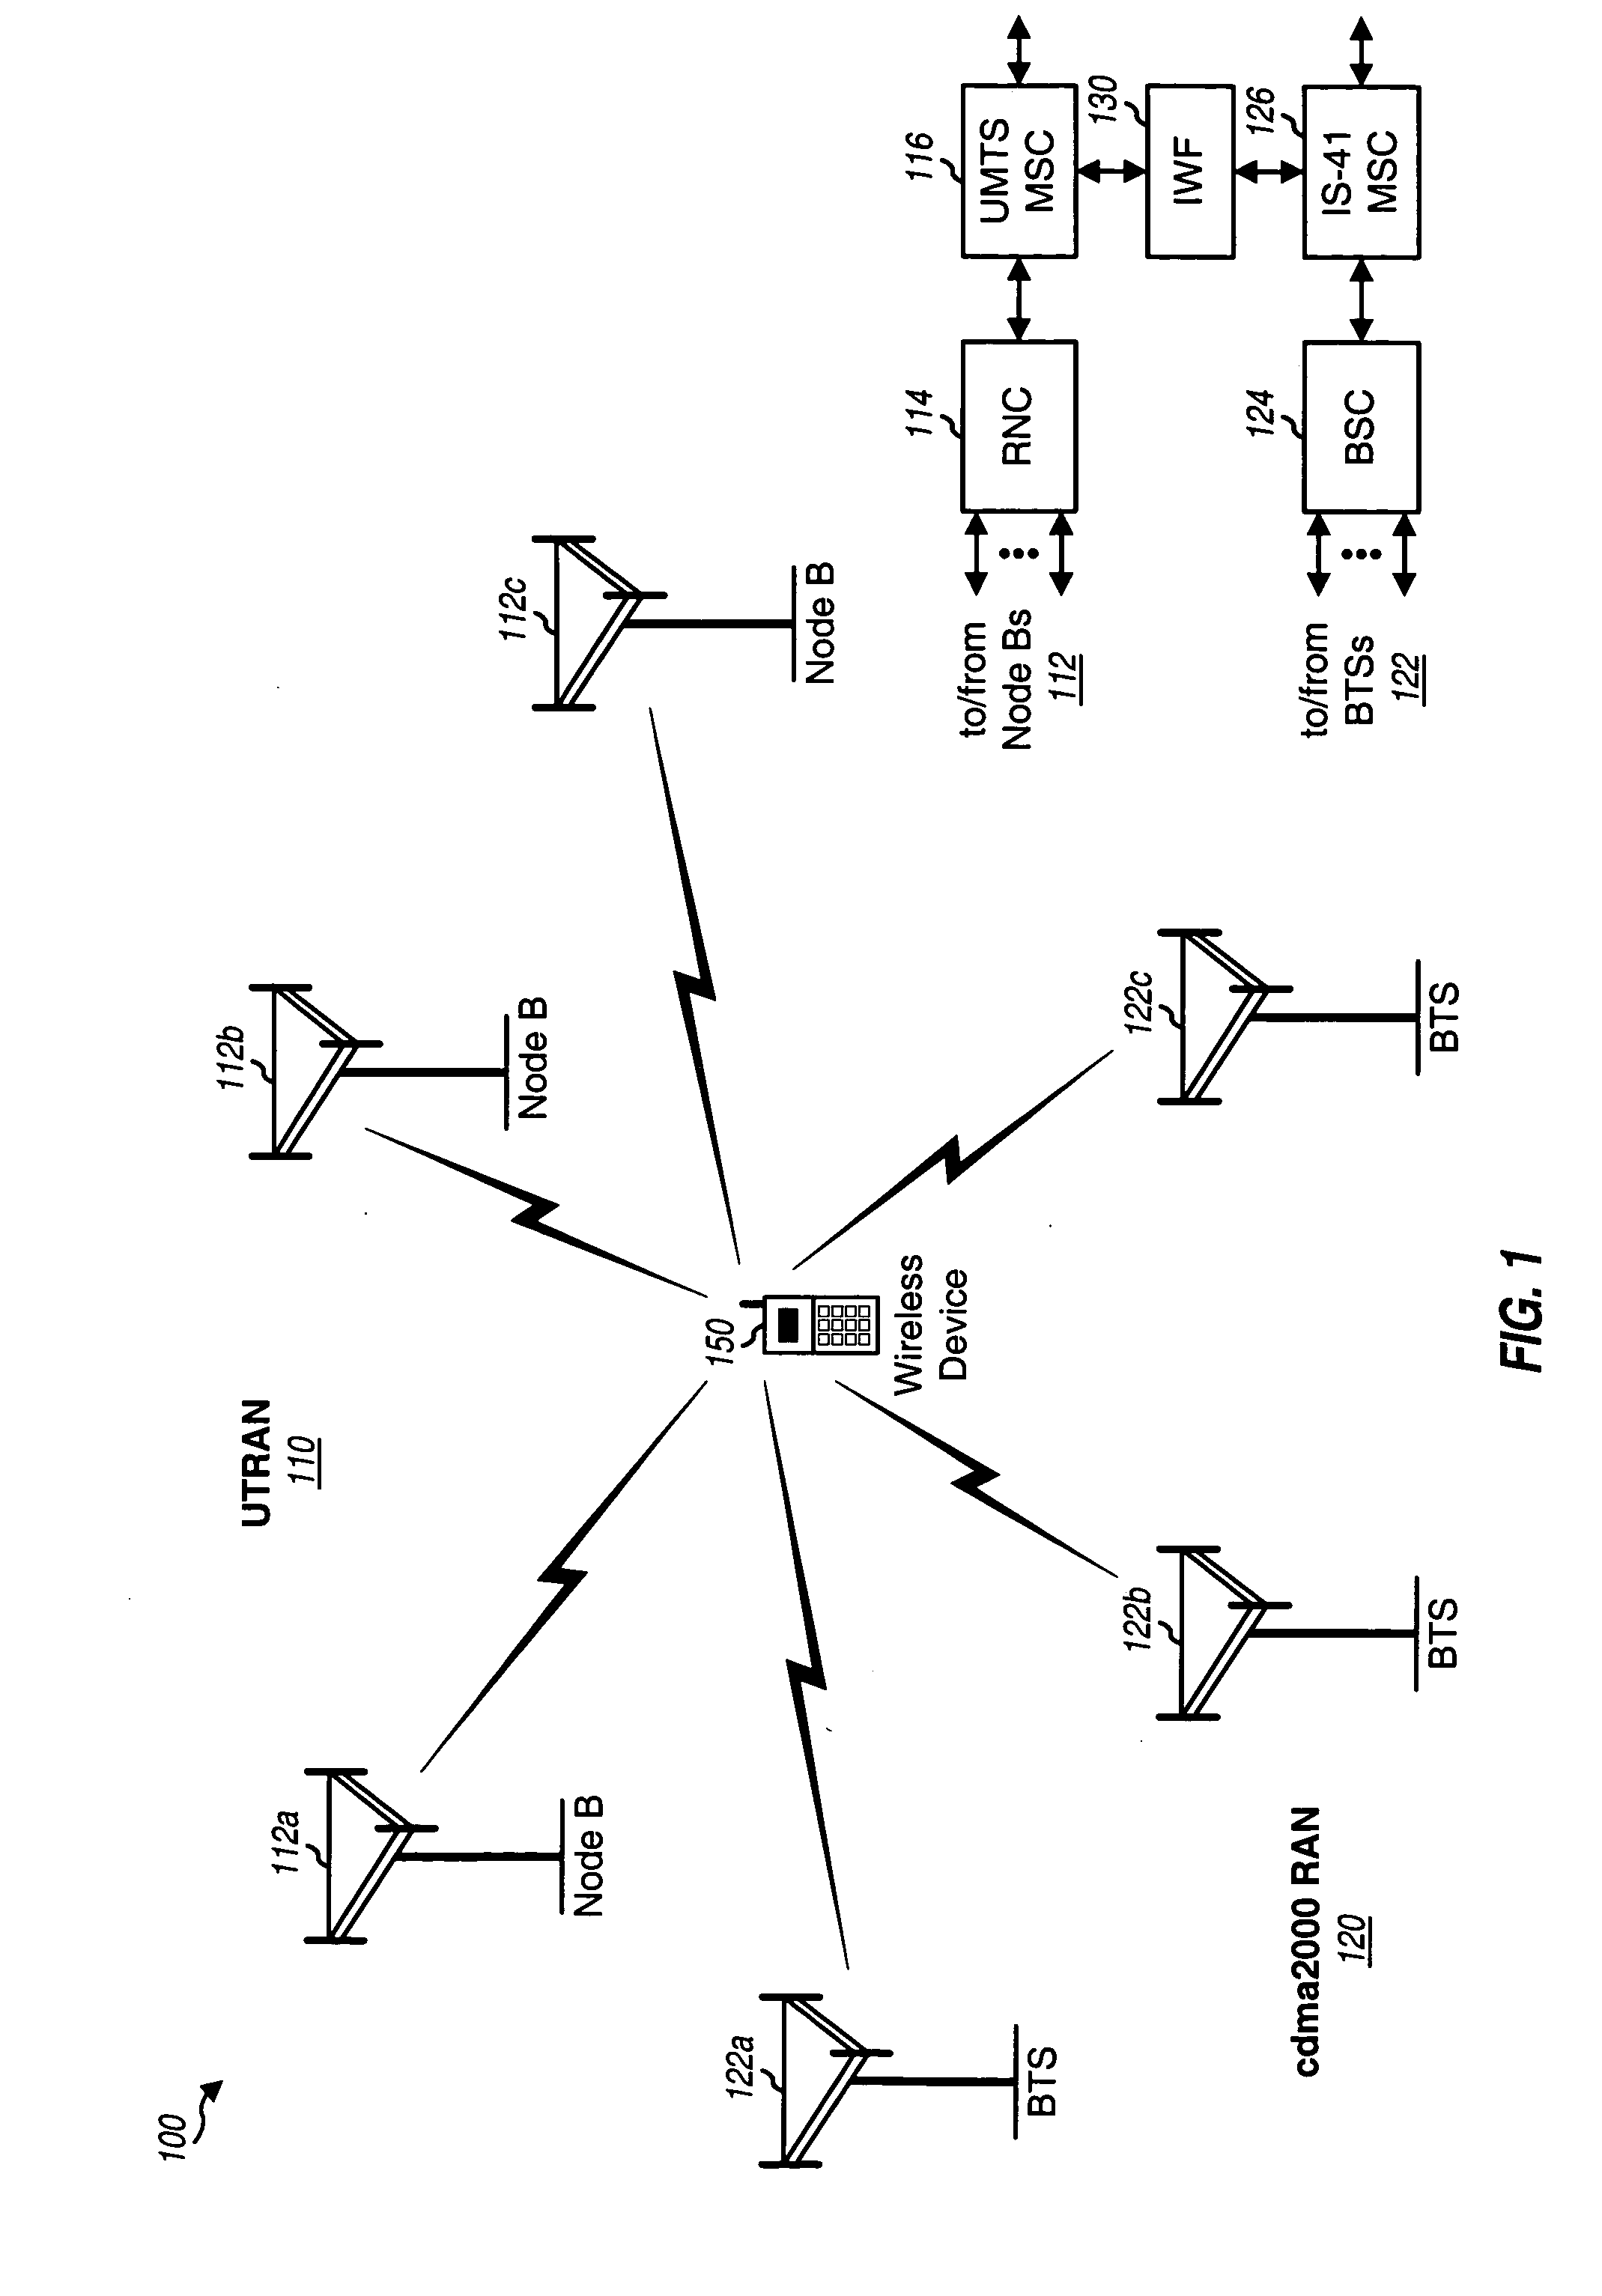 Inter-system handoff between wireless communication networks of different radio access technologies